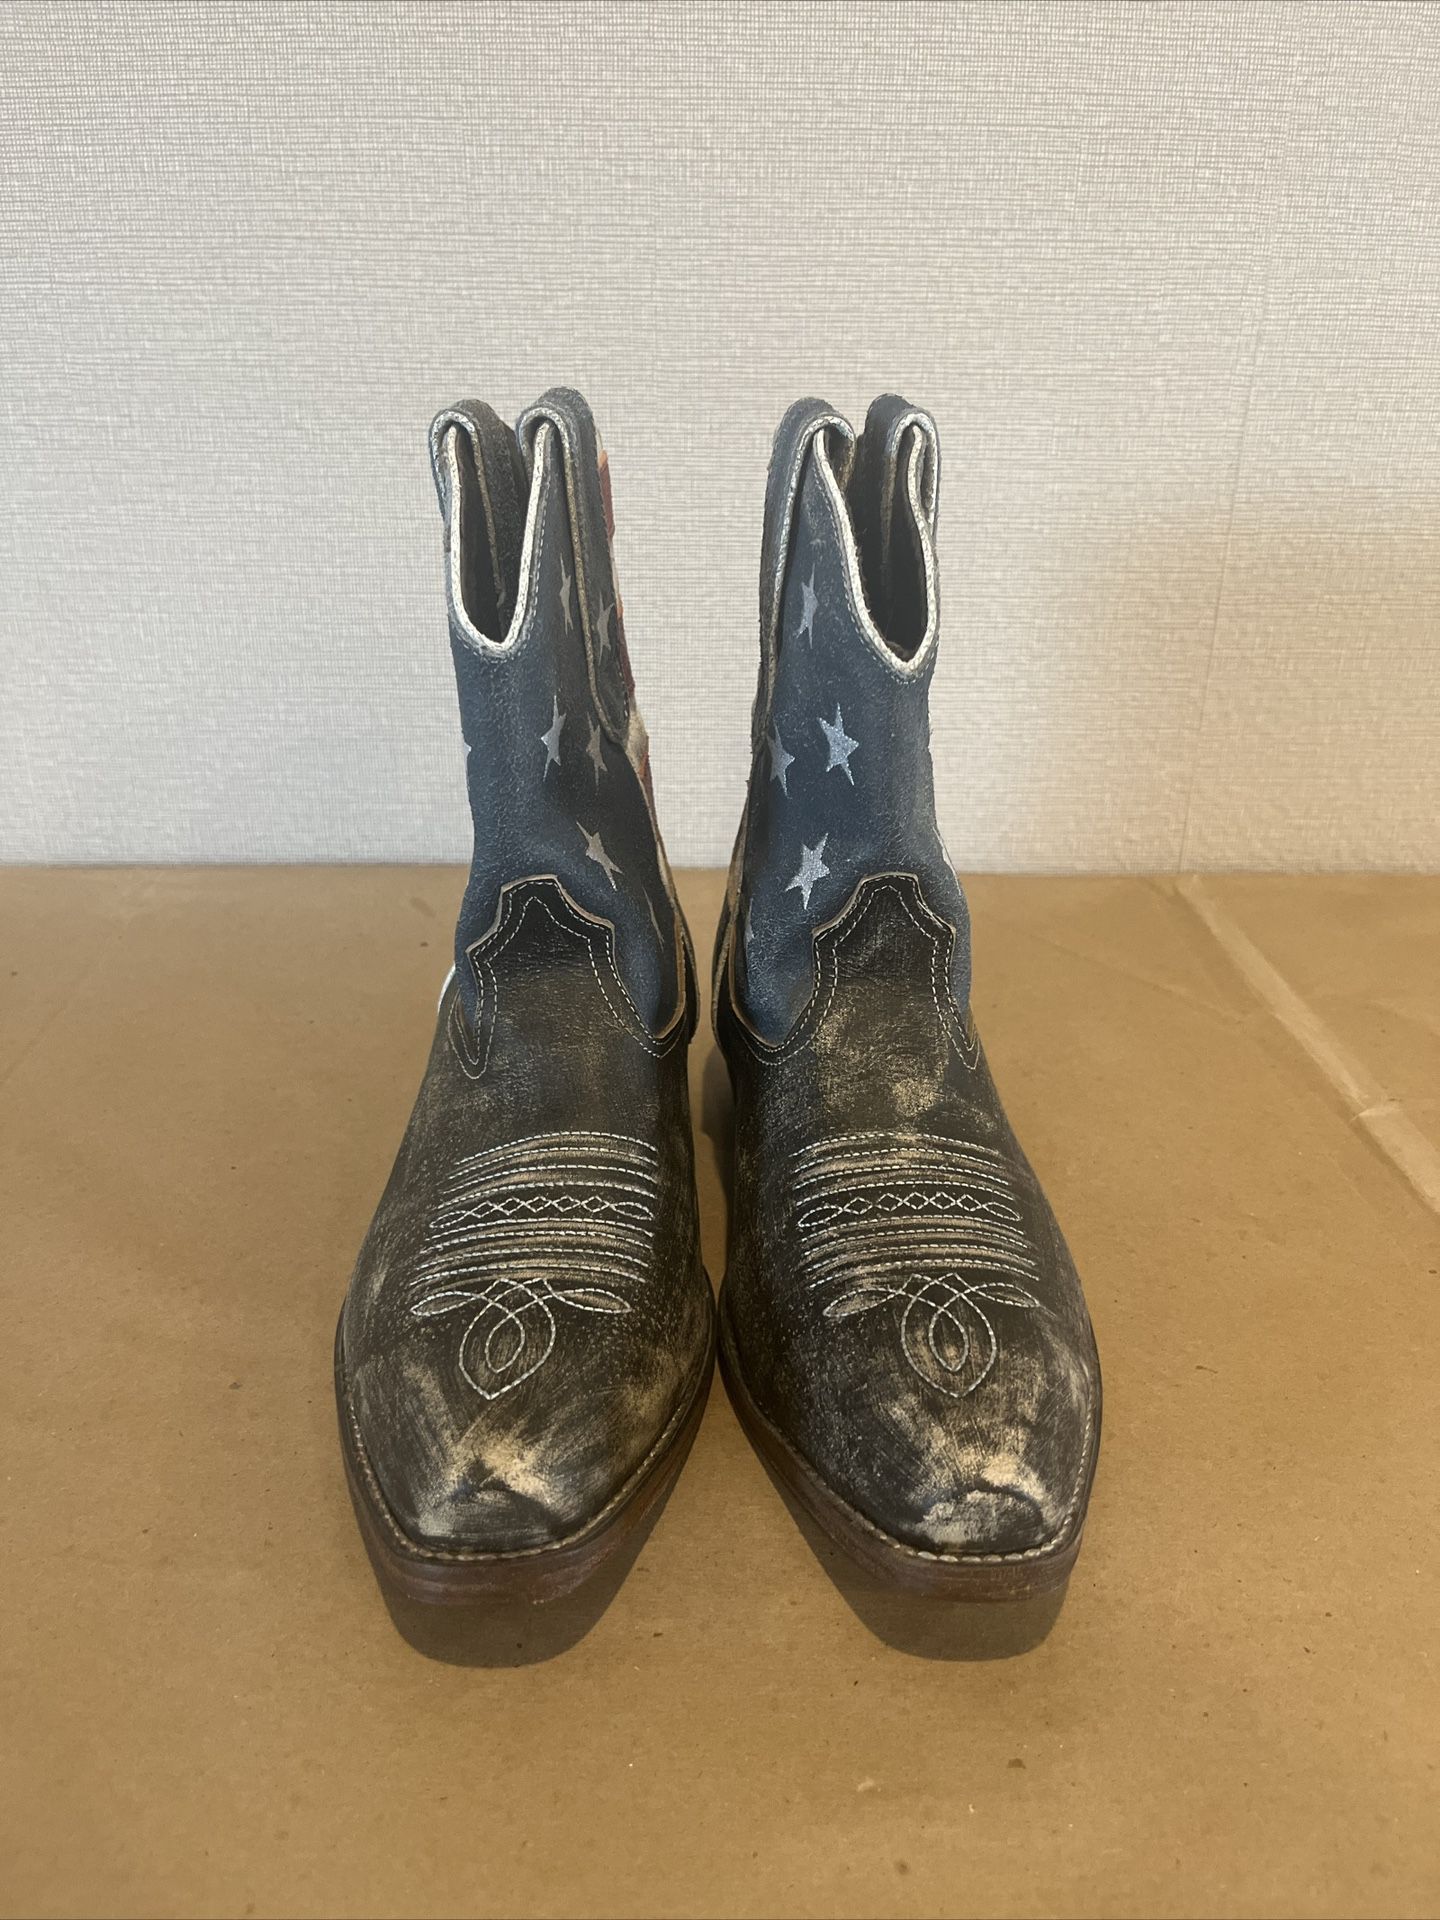 Roper western boots sz 8.5 Stars and stripes vintage looking